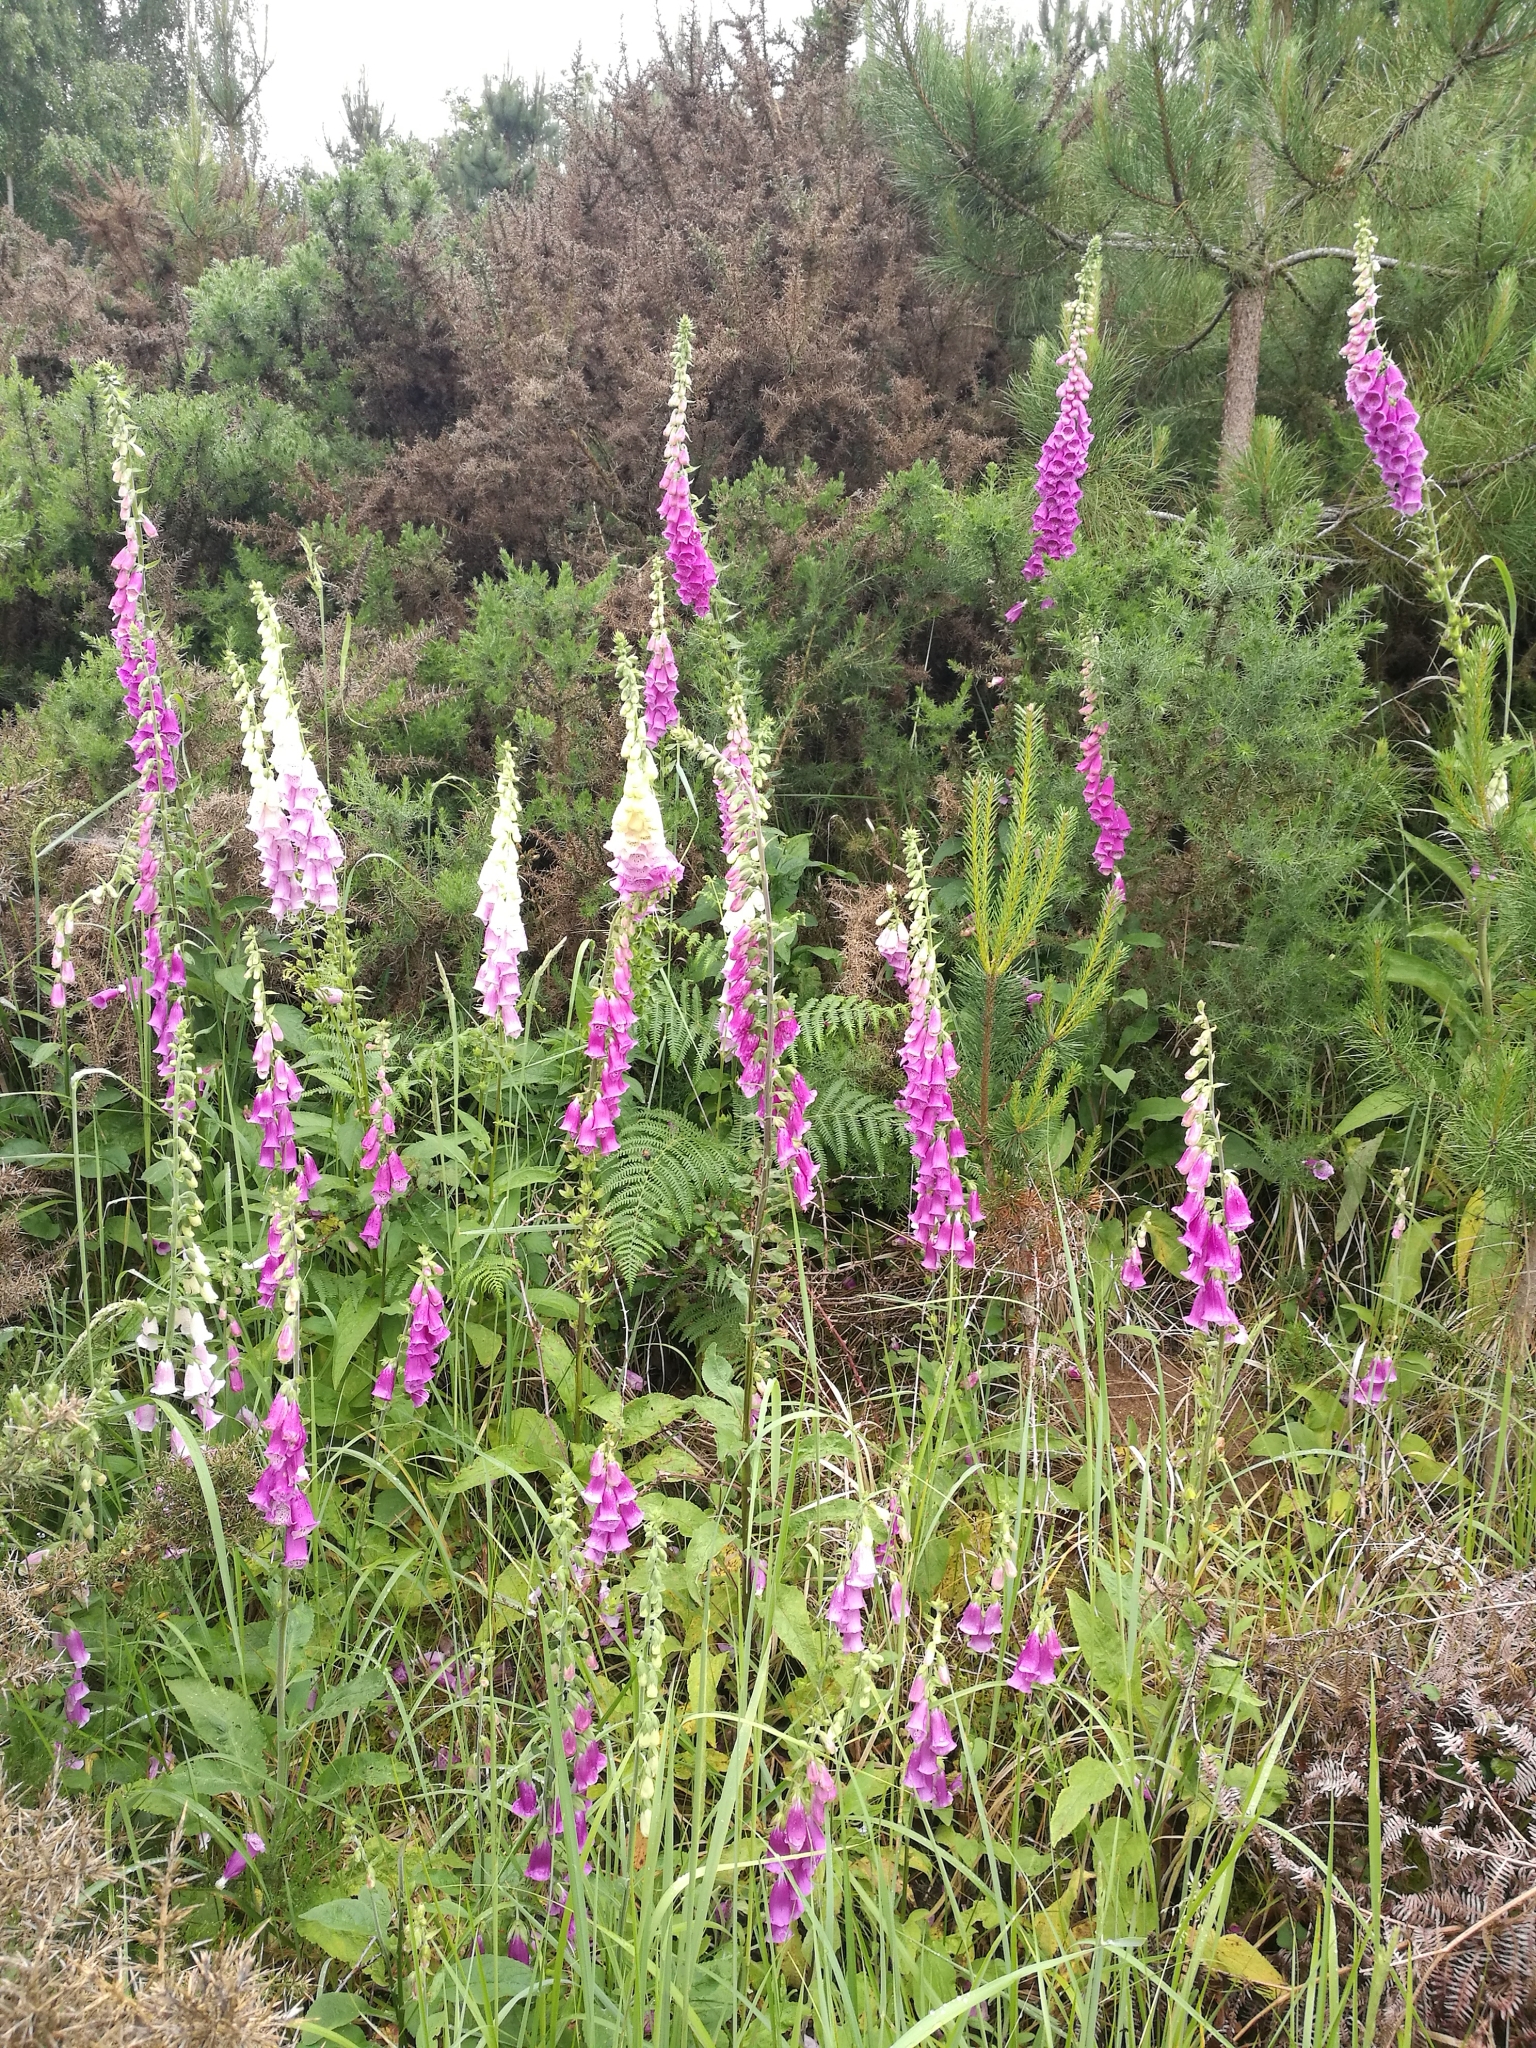 A photo from the FoTF Conservation Event - June 2021 - Brash Clearance at Mildenhall Mugwort Pit : A shot of a plant at Mildenhall Mugwort Pit